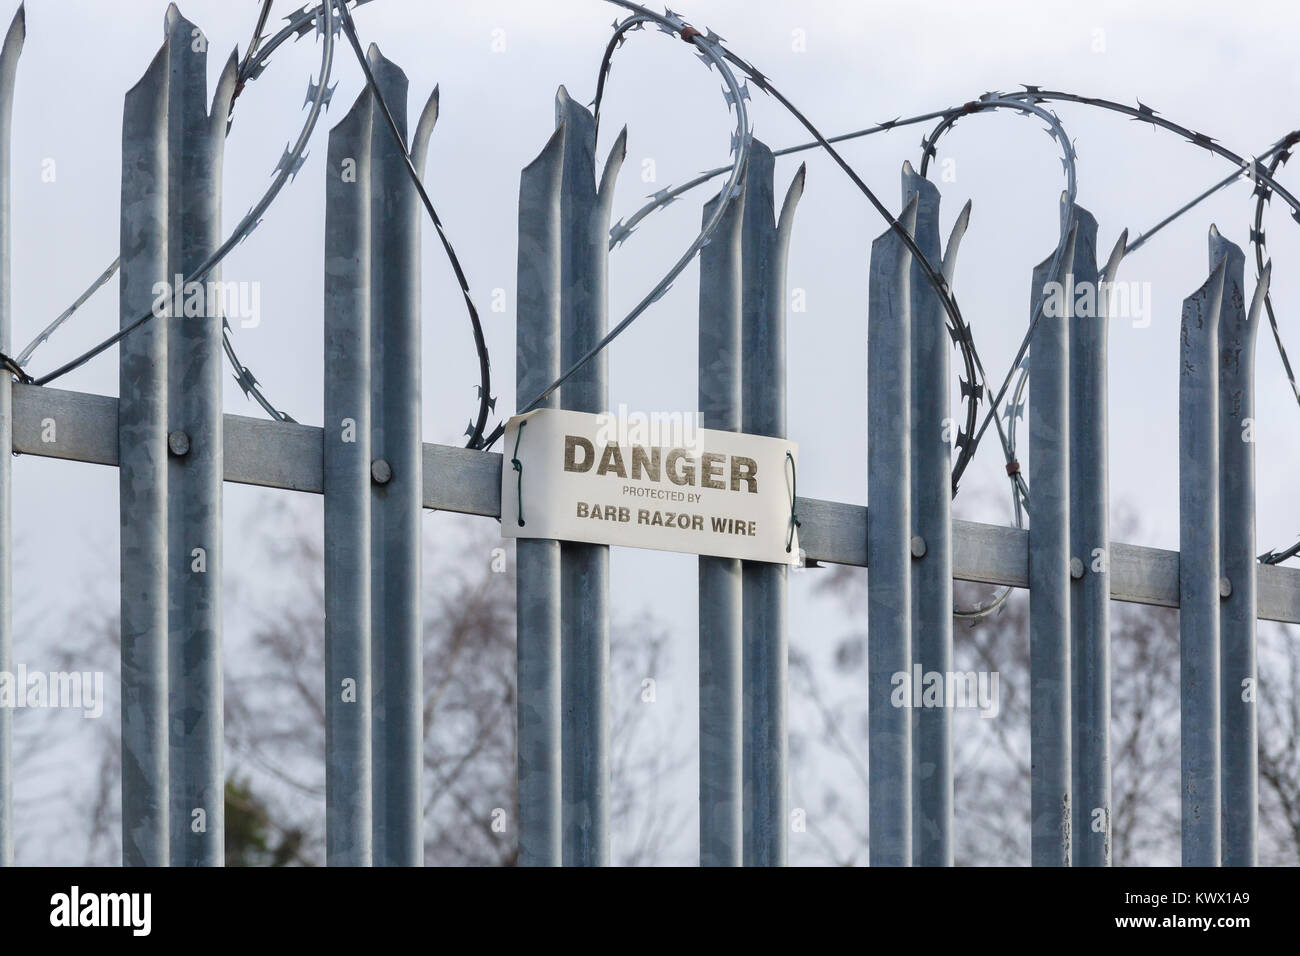 Galvanised steel spikes on top of a security gate or fence topped with barbed razor wire with a danger notice Stock Photo